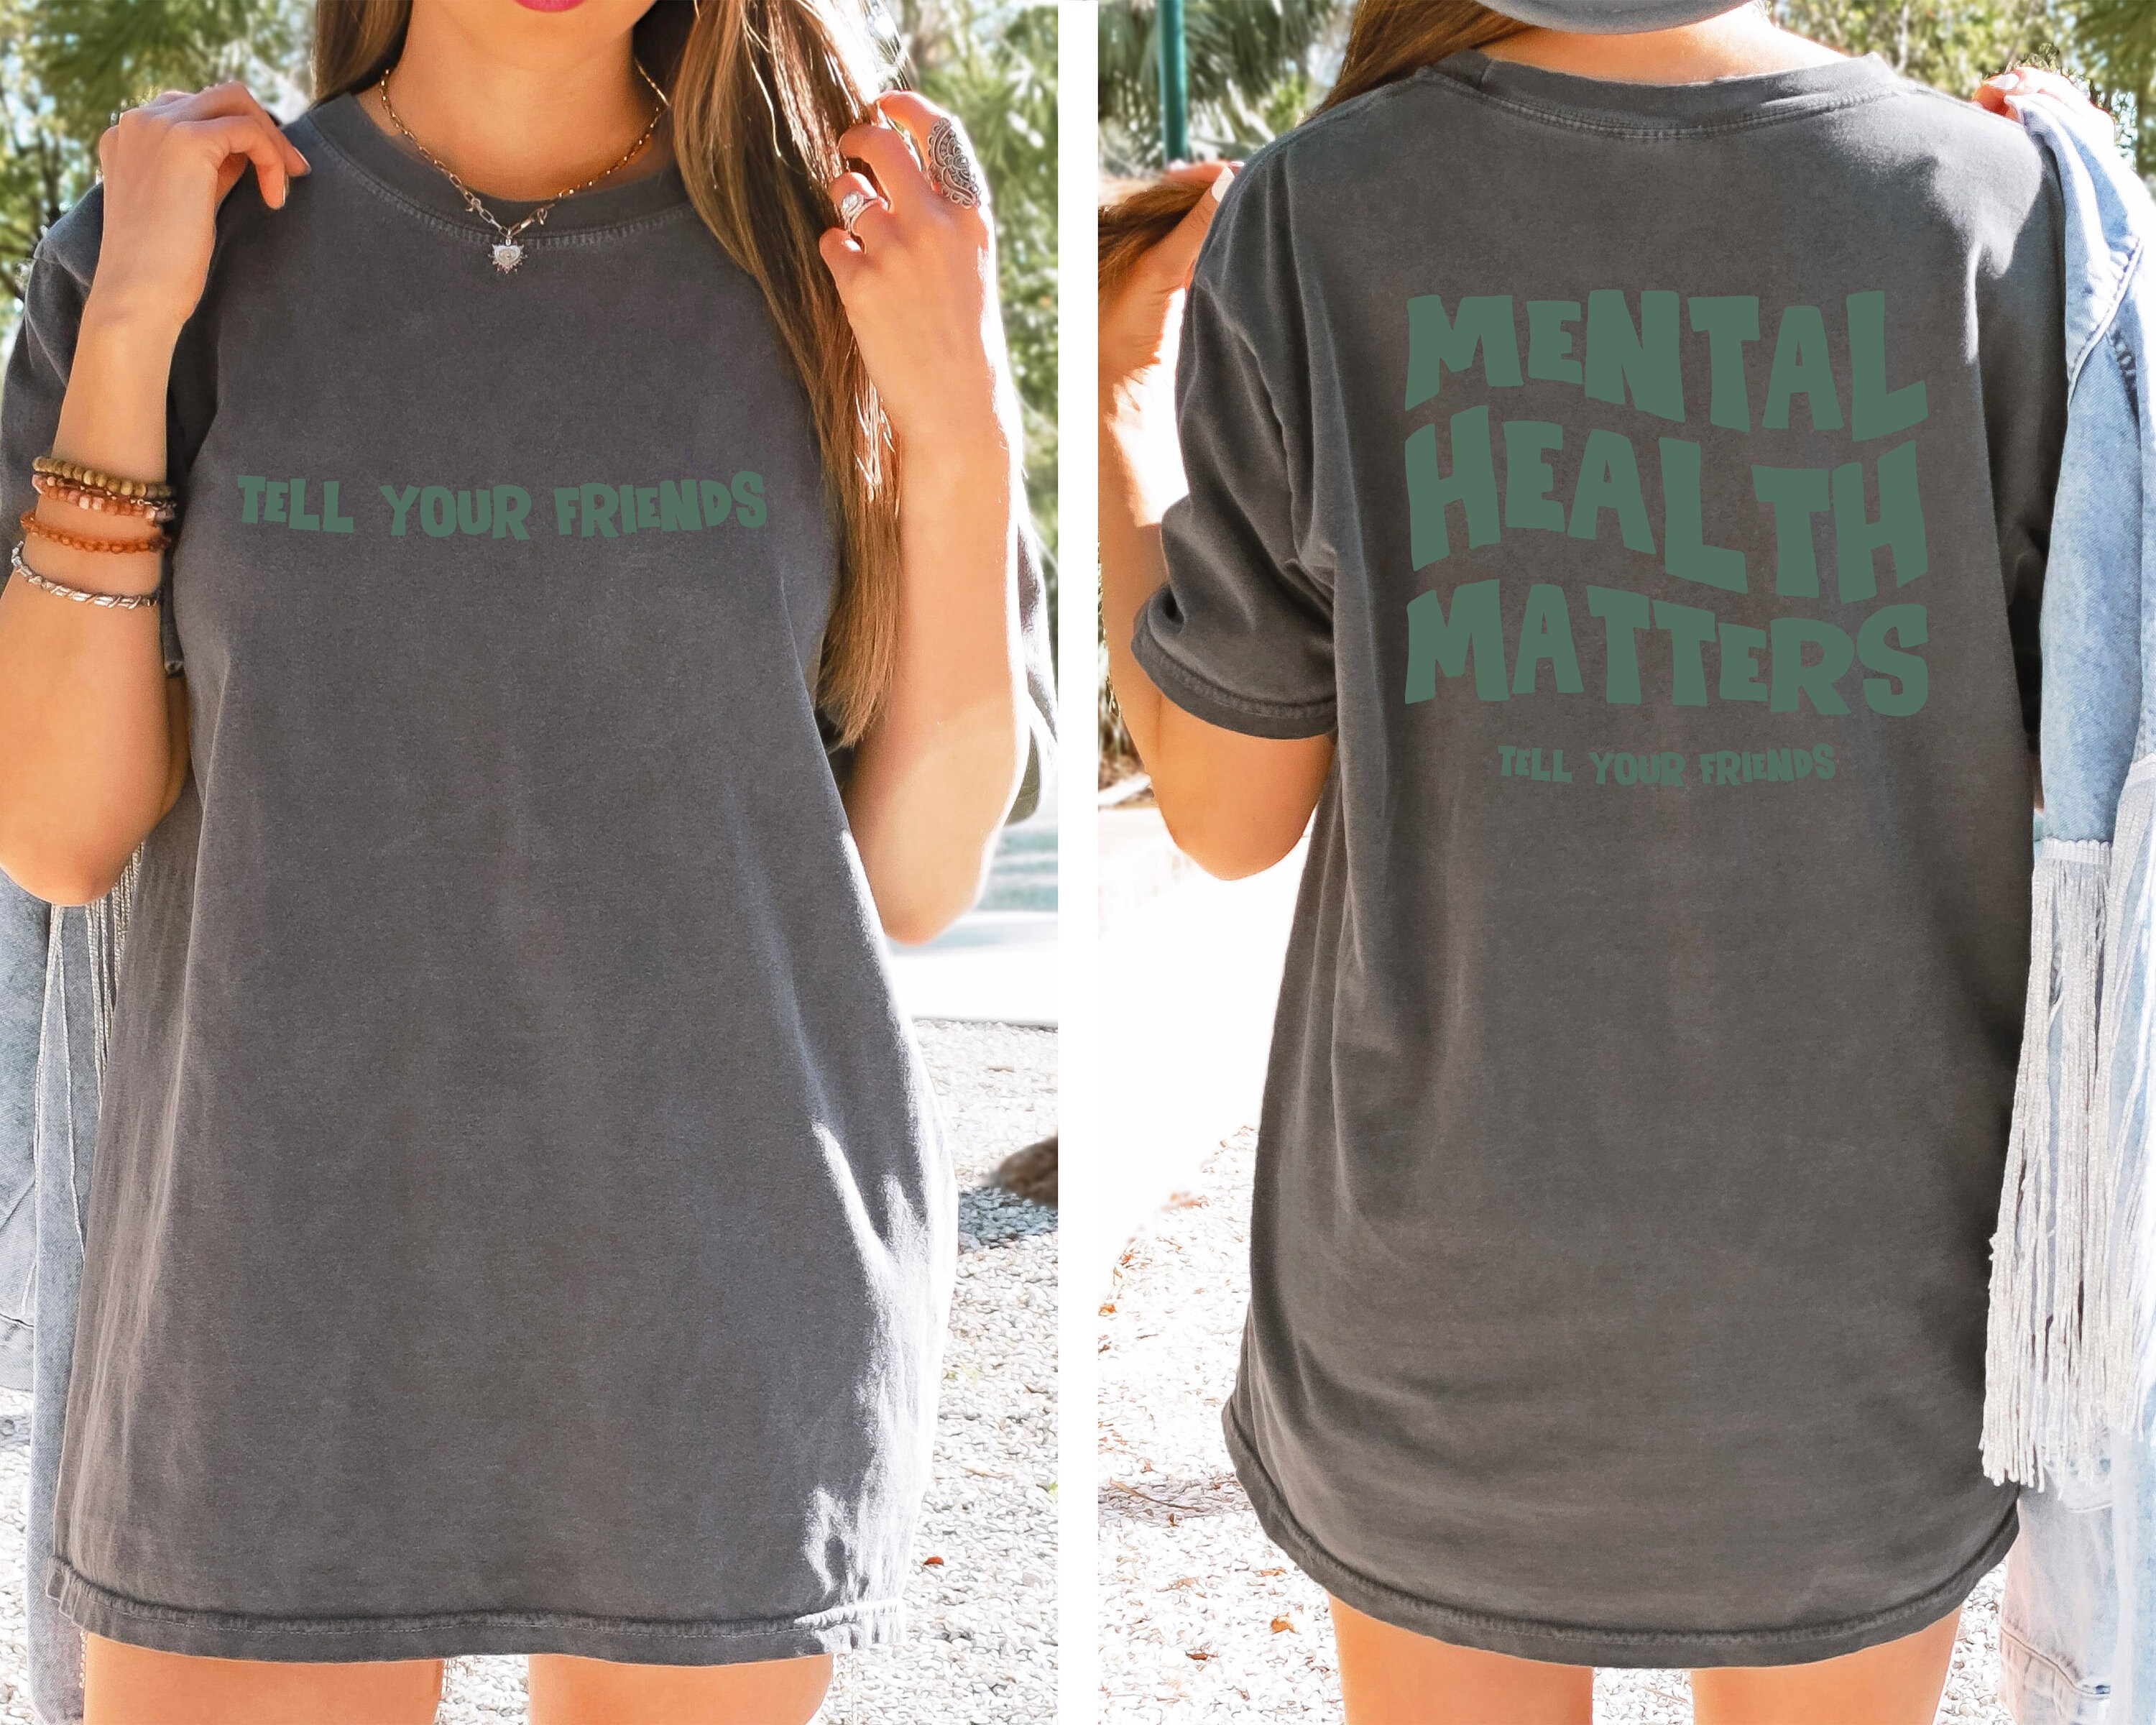 Discover Mental Health Matters Shirt, Quote Shirt, Womens Oversized Shirt, Oversized Shirt, Inspirational Shirt